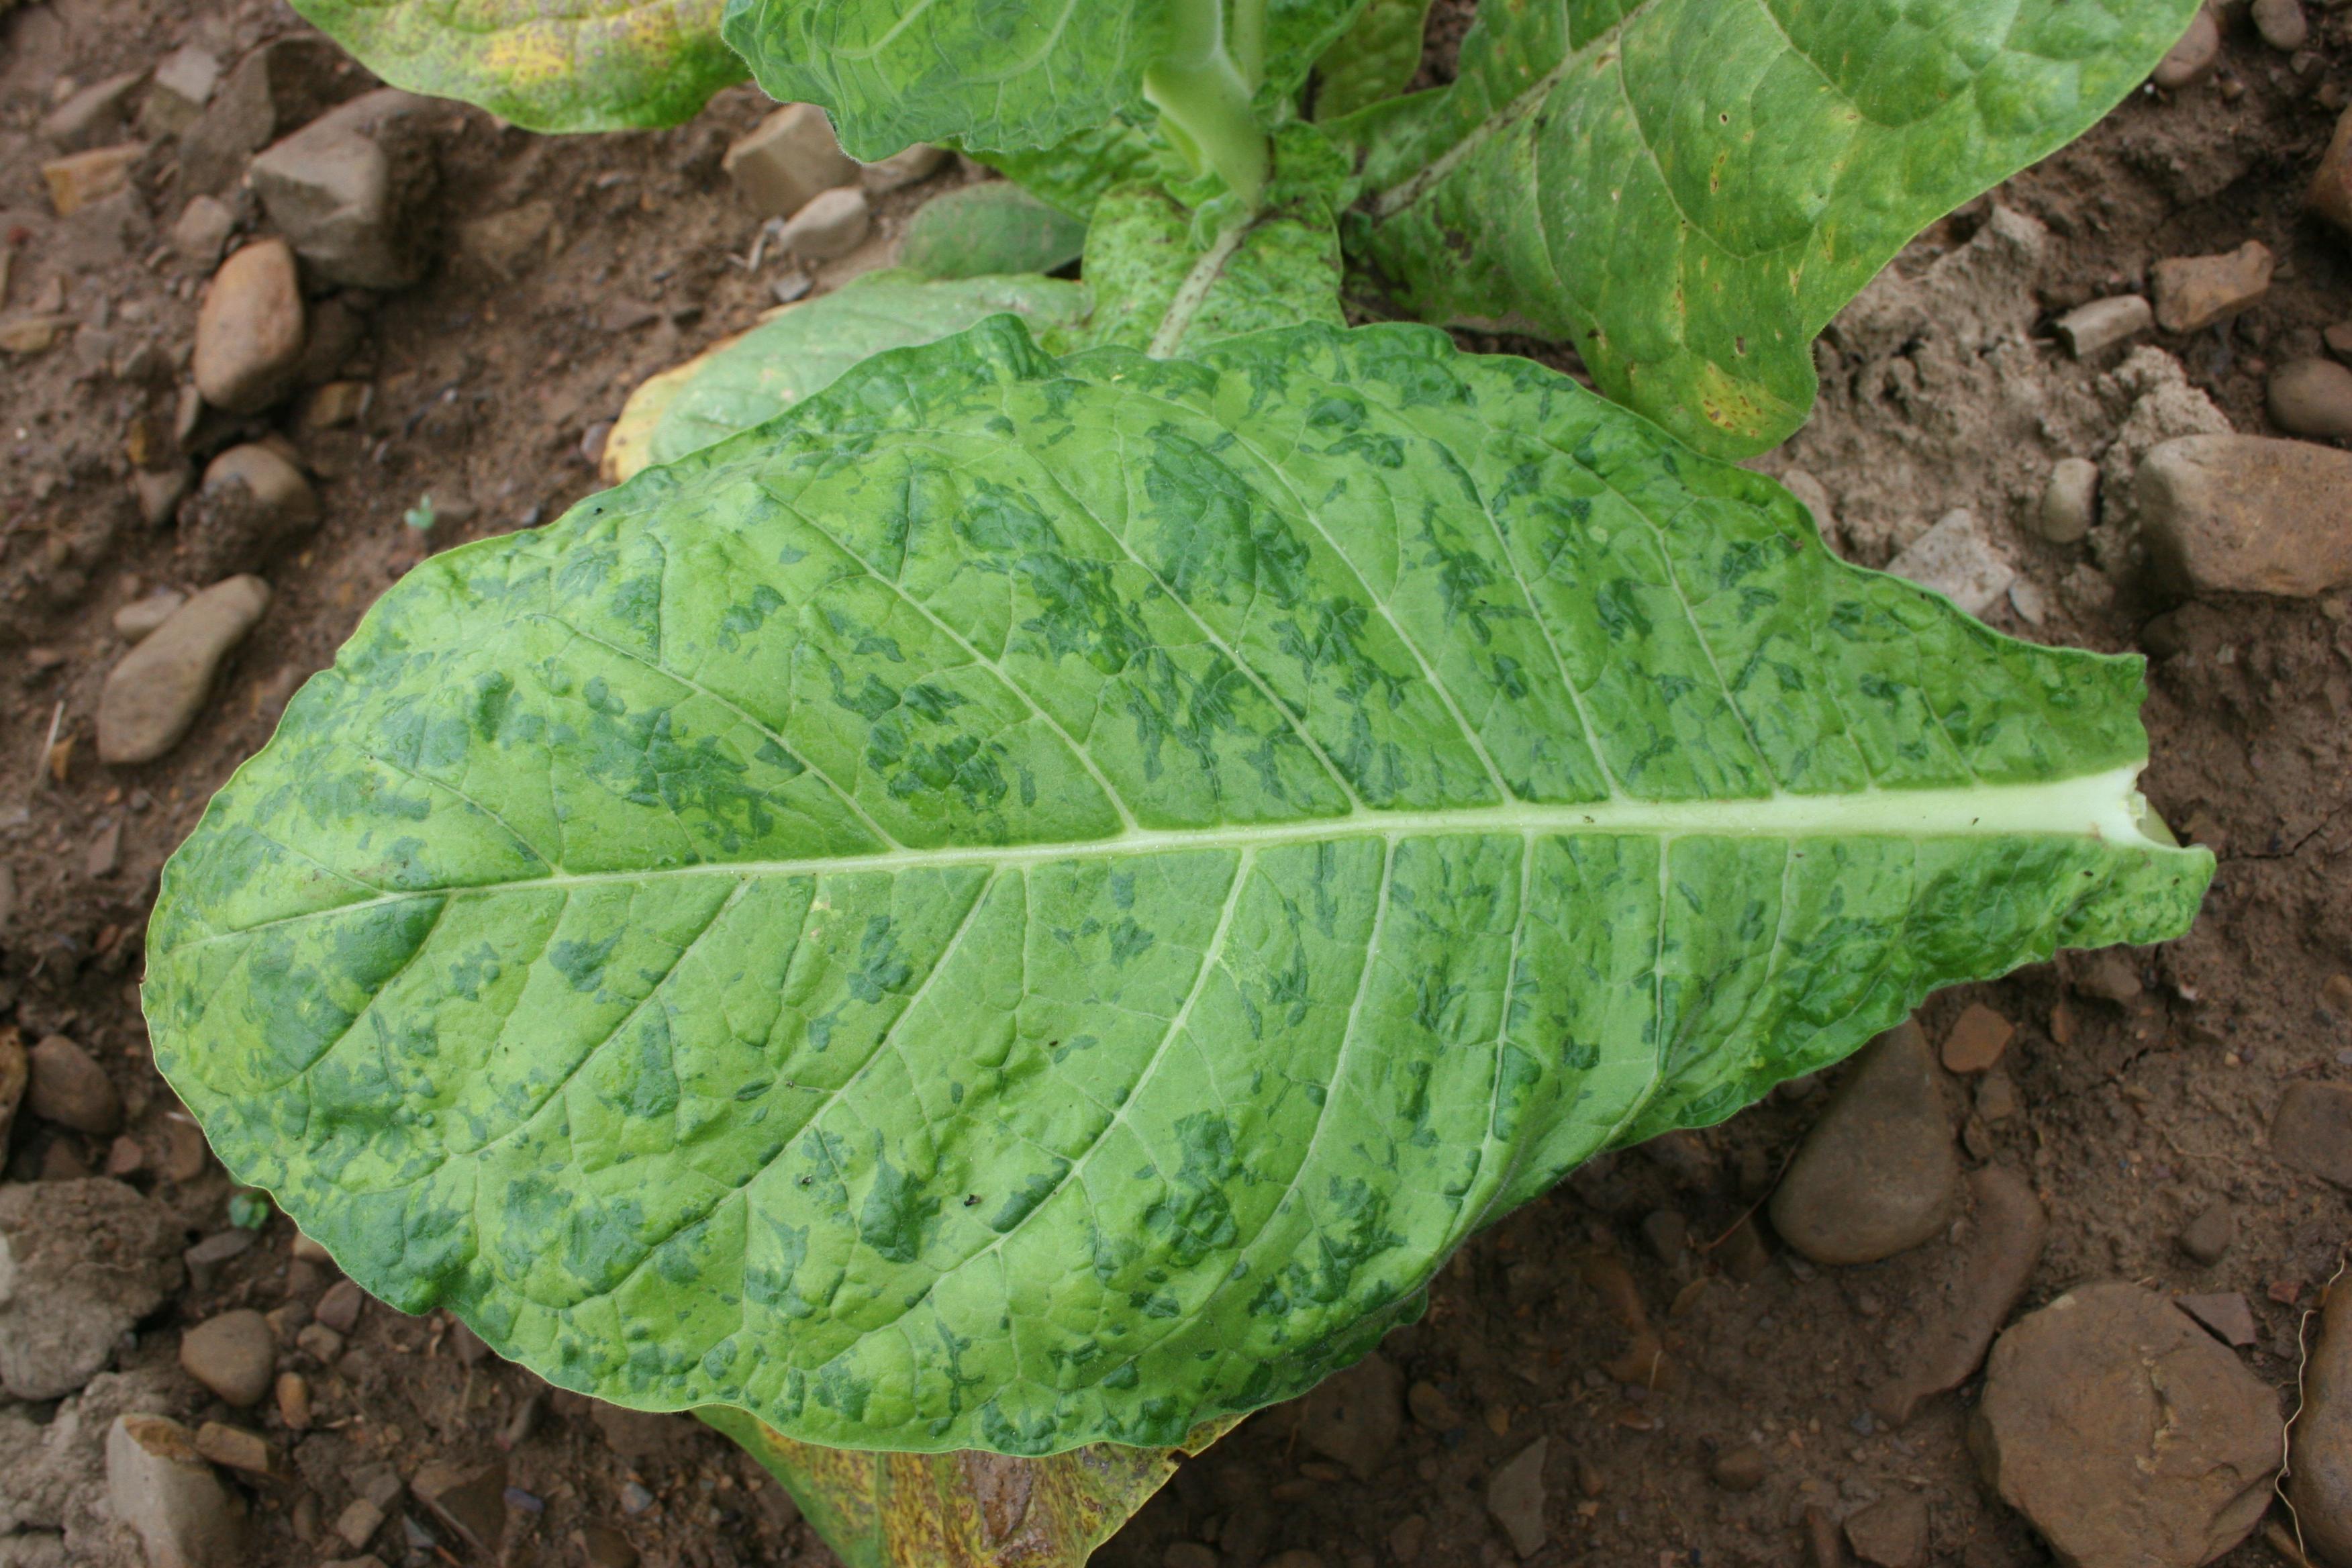 Tobacco mosaic virus (TMV), once a serious disease of burley, rarely occurs in fields now since many varieties have excellent resistance.  The most notable symptom of this disease is the mosaic of dark and light green areas on foliage.  TMV is easily transmitted from plant to plant by mechanical means (e.g., worker's hands, cultivation, etc.) (Photo: Kenneth Seebold)